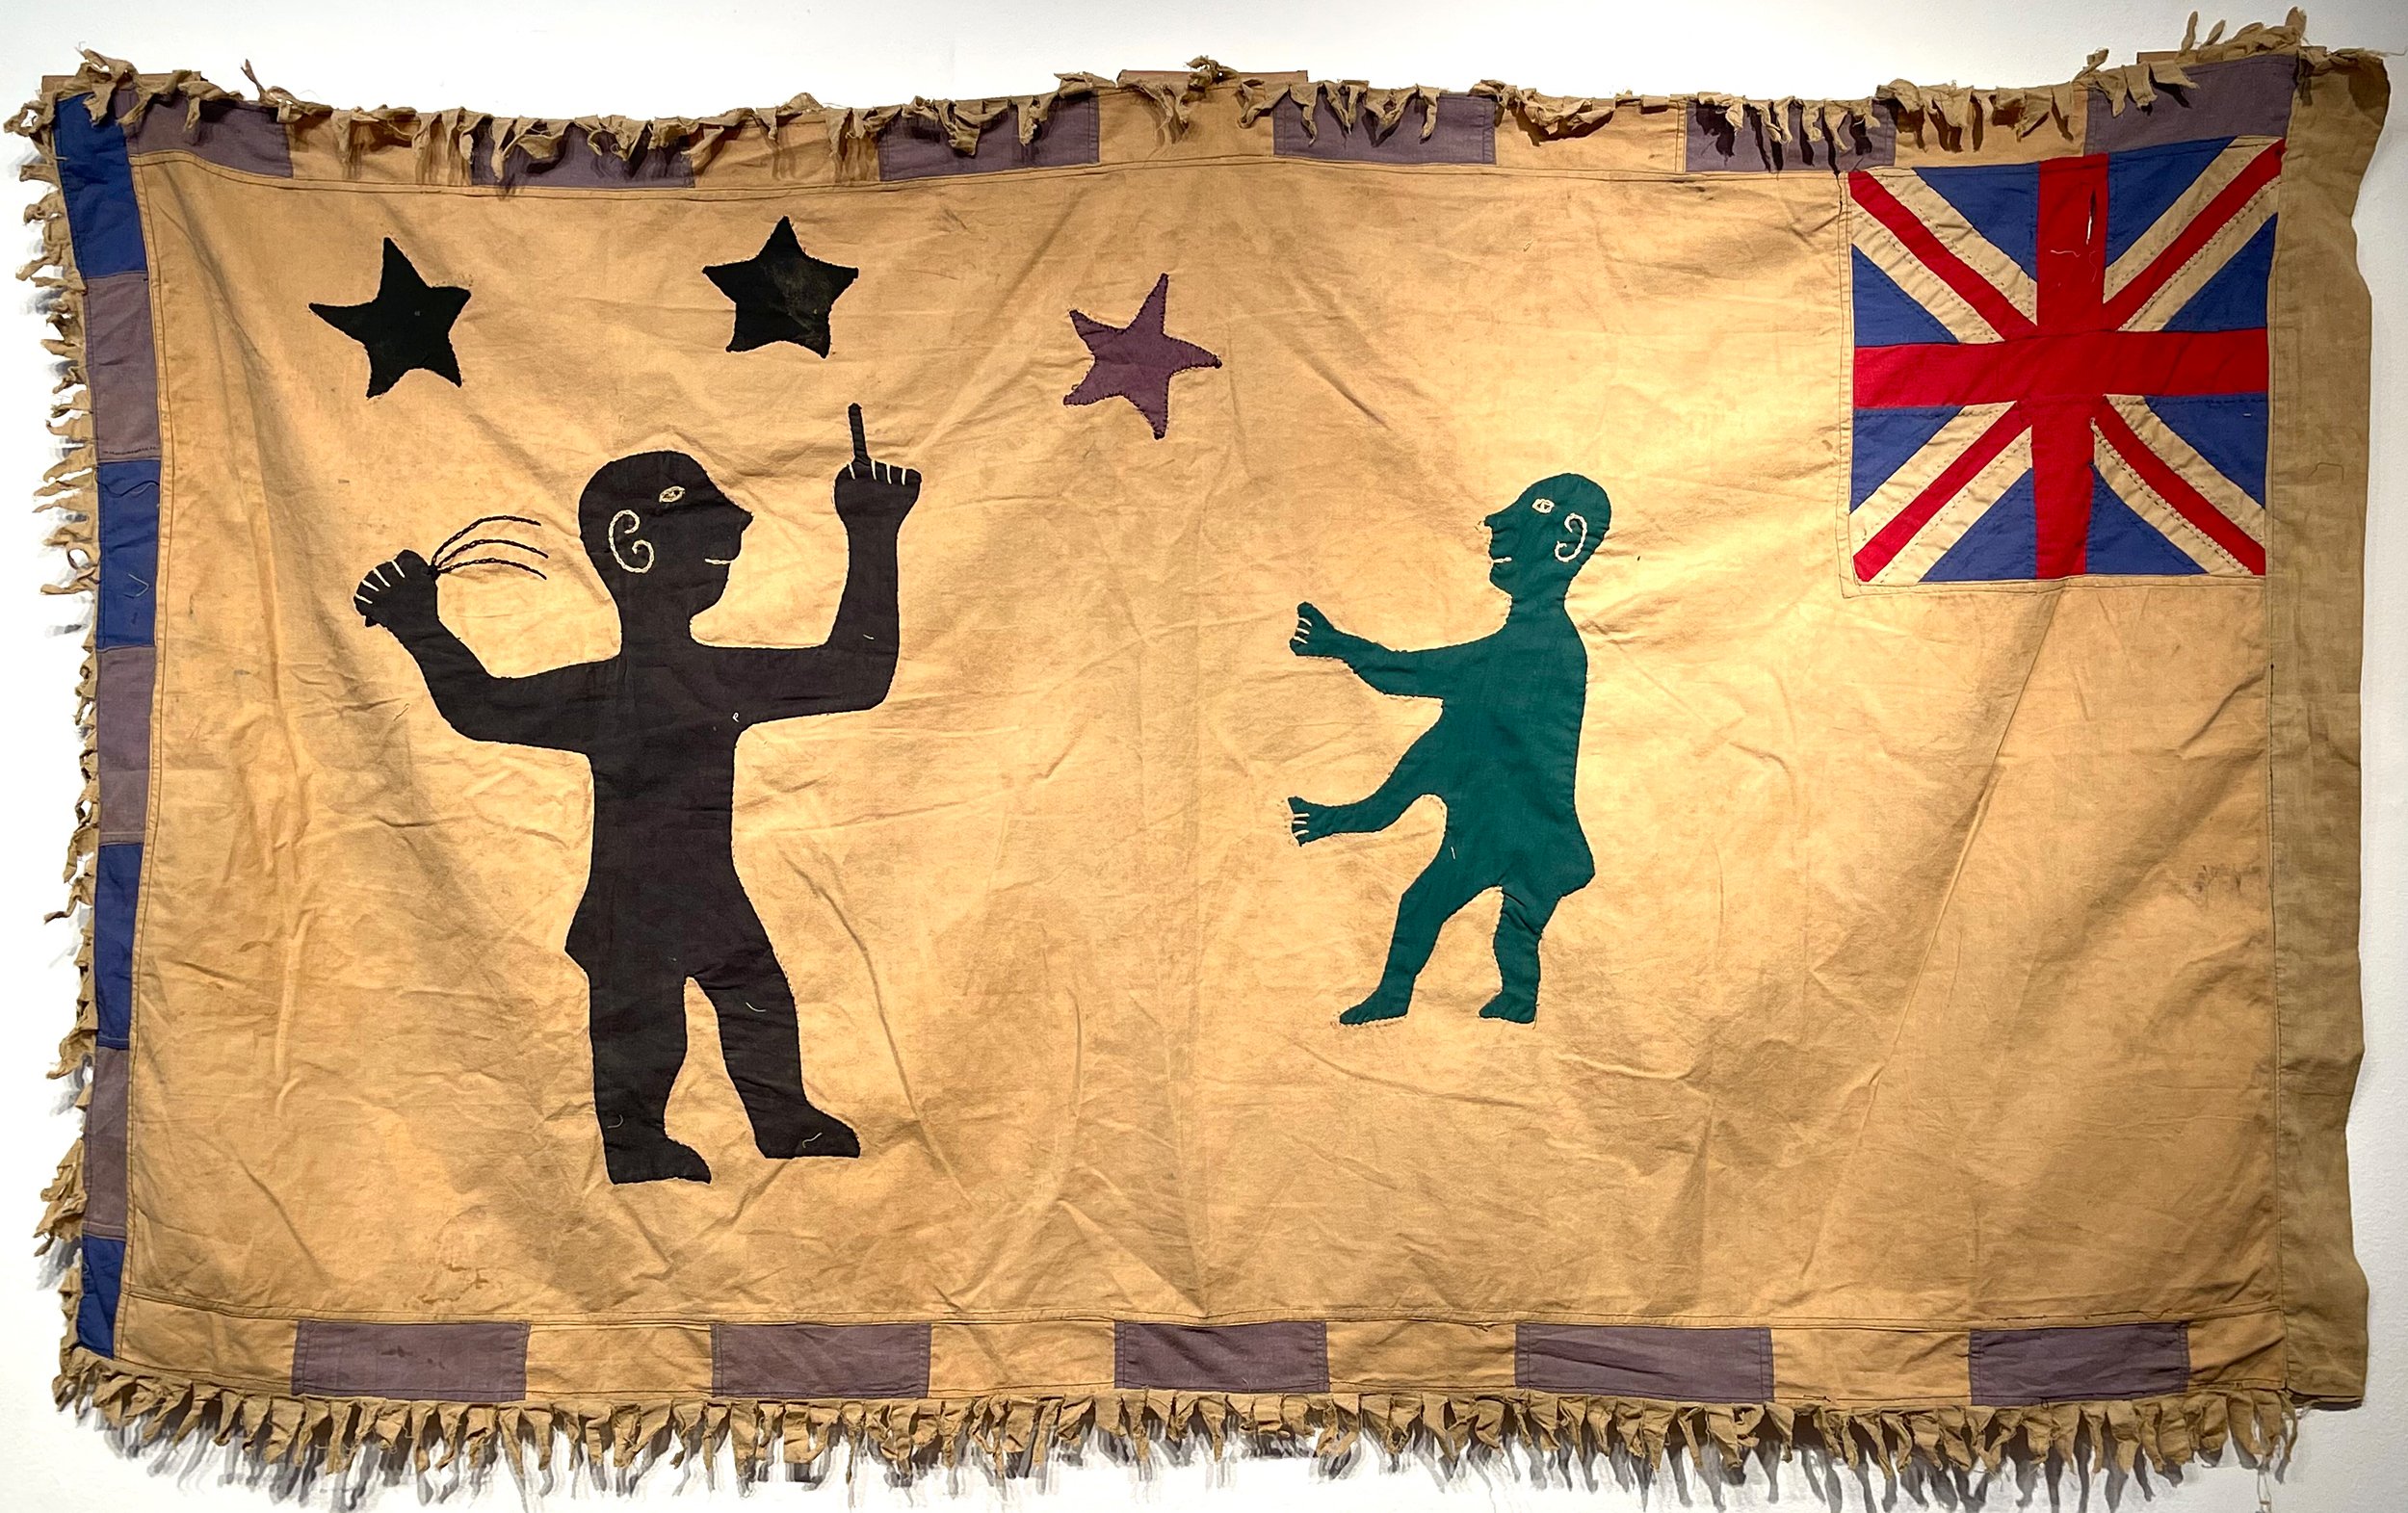   FLAG 006   Early-mid 20th century  34” x 58”    ASK ABOUT THIS WORK   